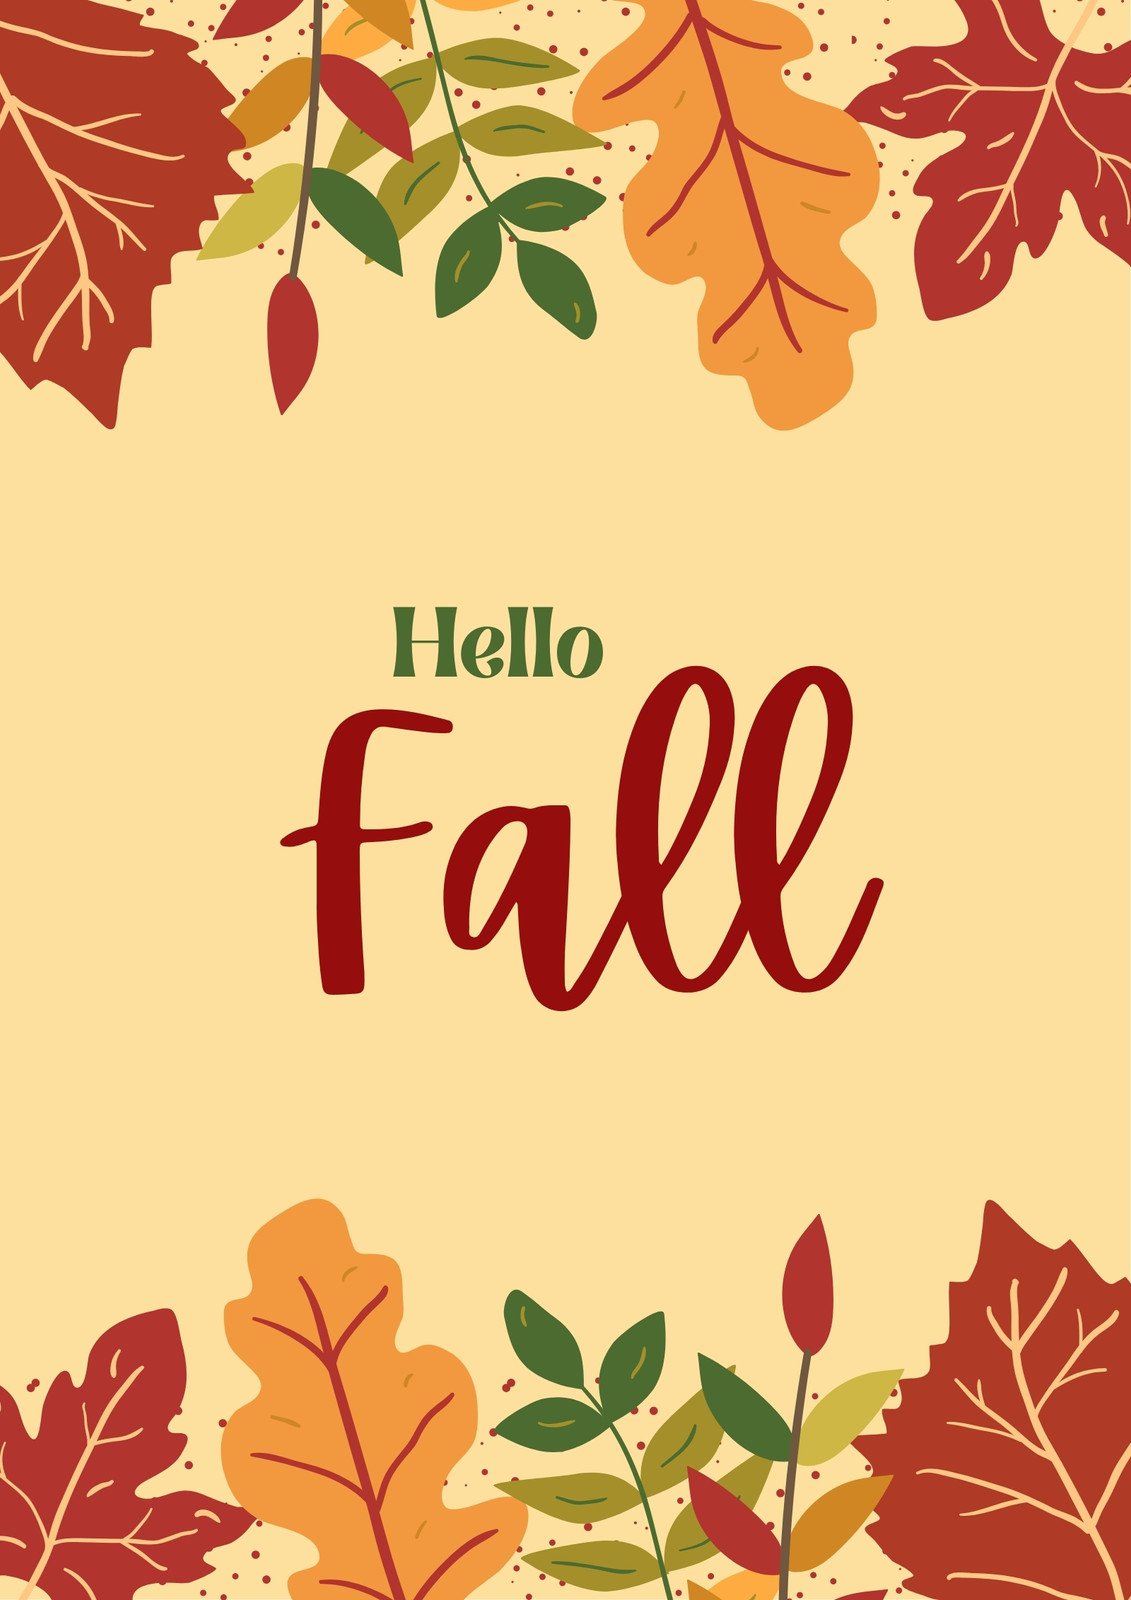 Page 3 - Free and customizable fall templates